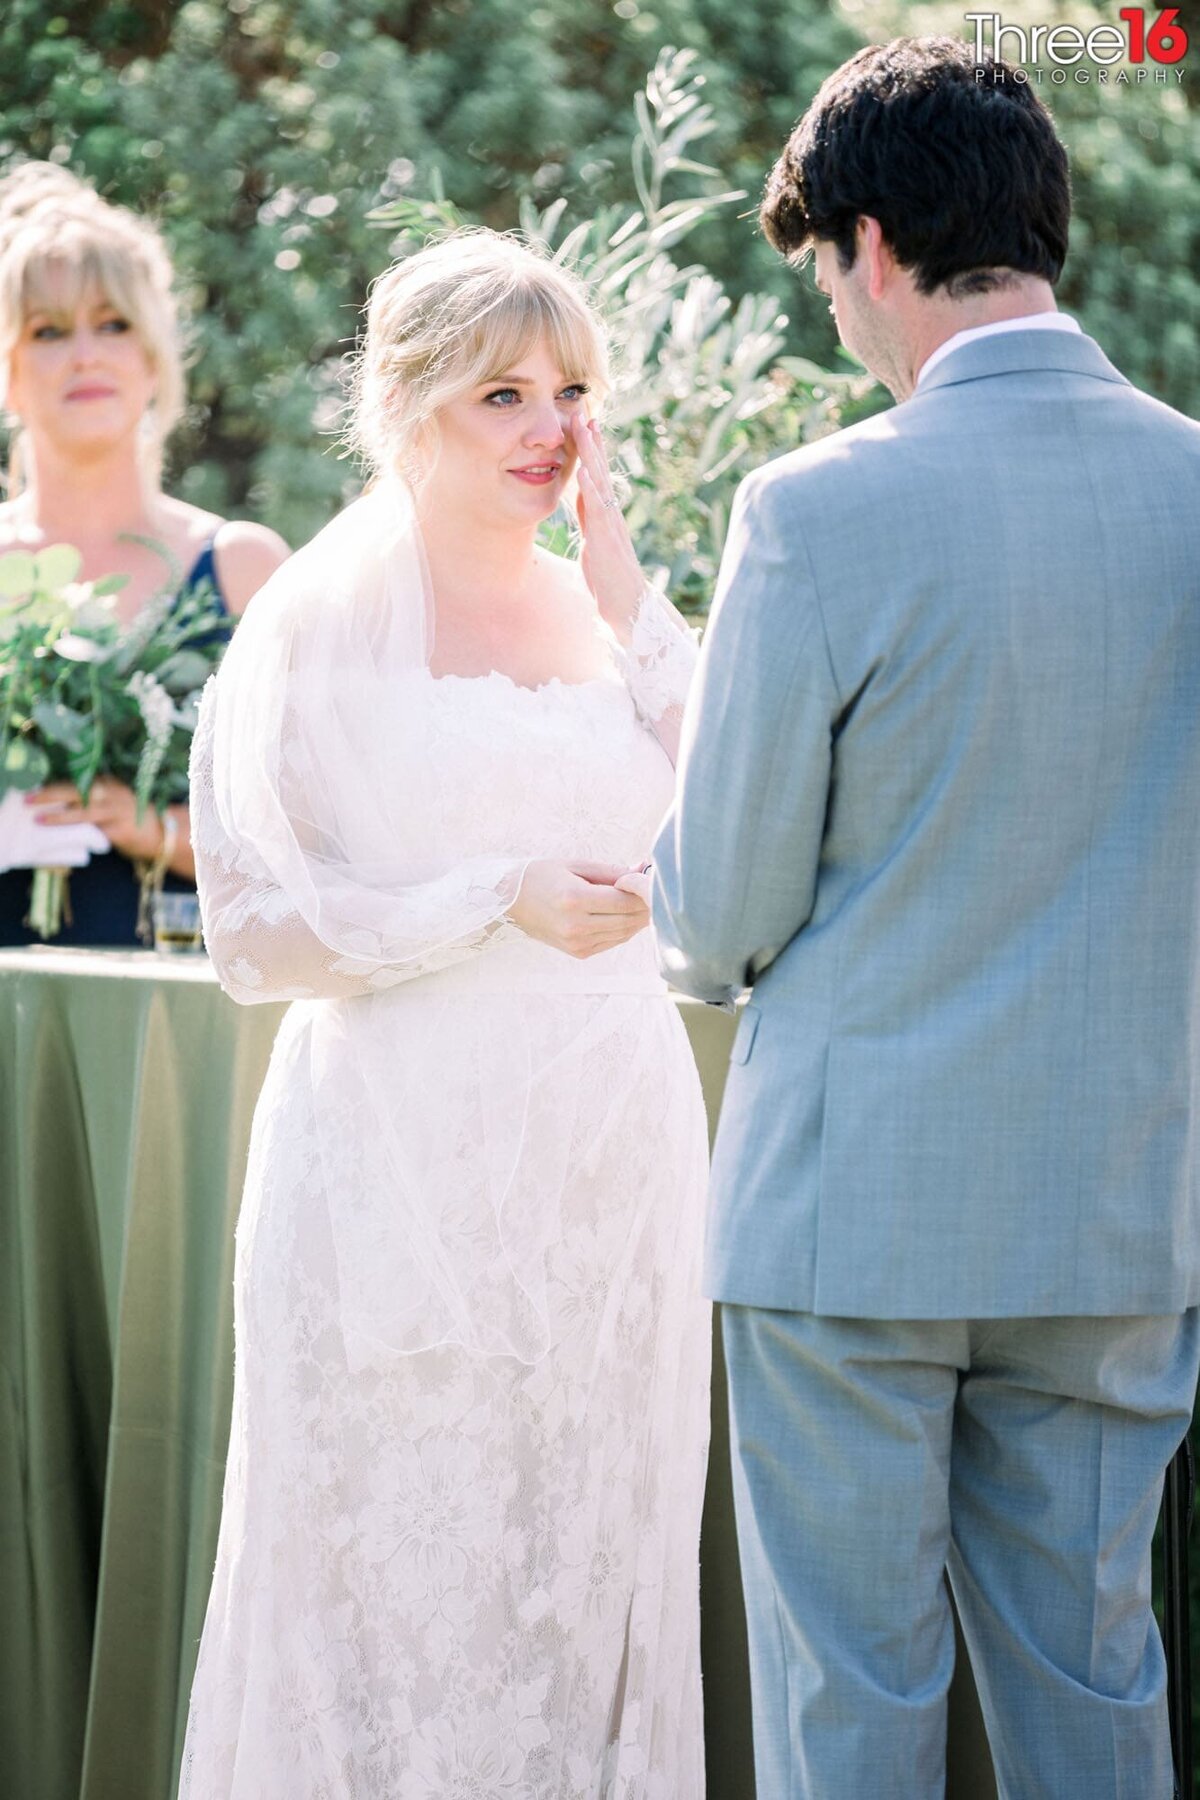 Bride wipes a tear from her cheek as her Groom reads his vows to her